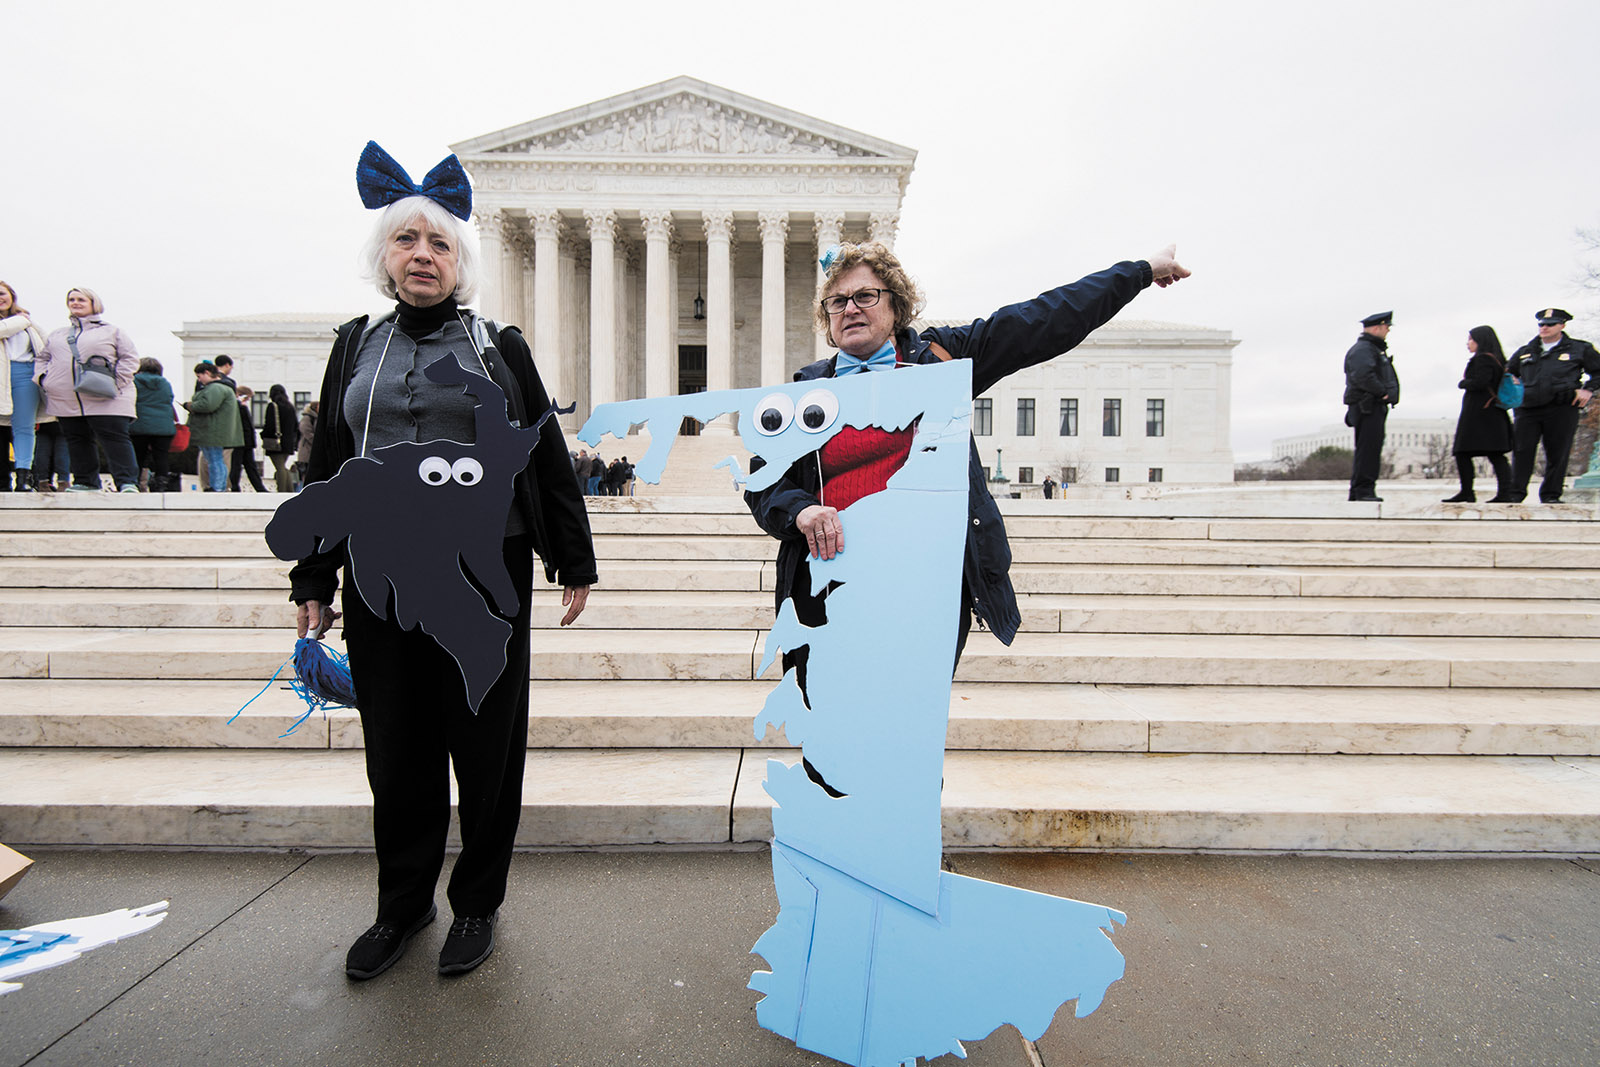 Anti-gerrymandering activists in costume as Maryland district 5 (left) and district 1 (right) in front of the Supreme Court, March 2018